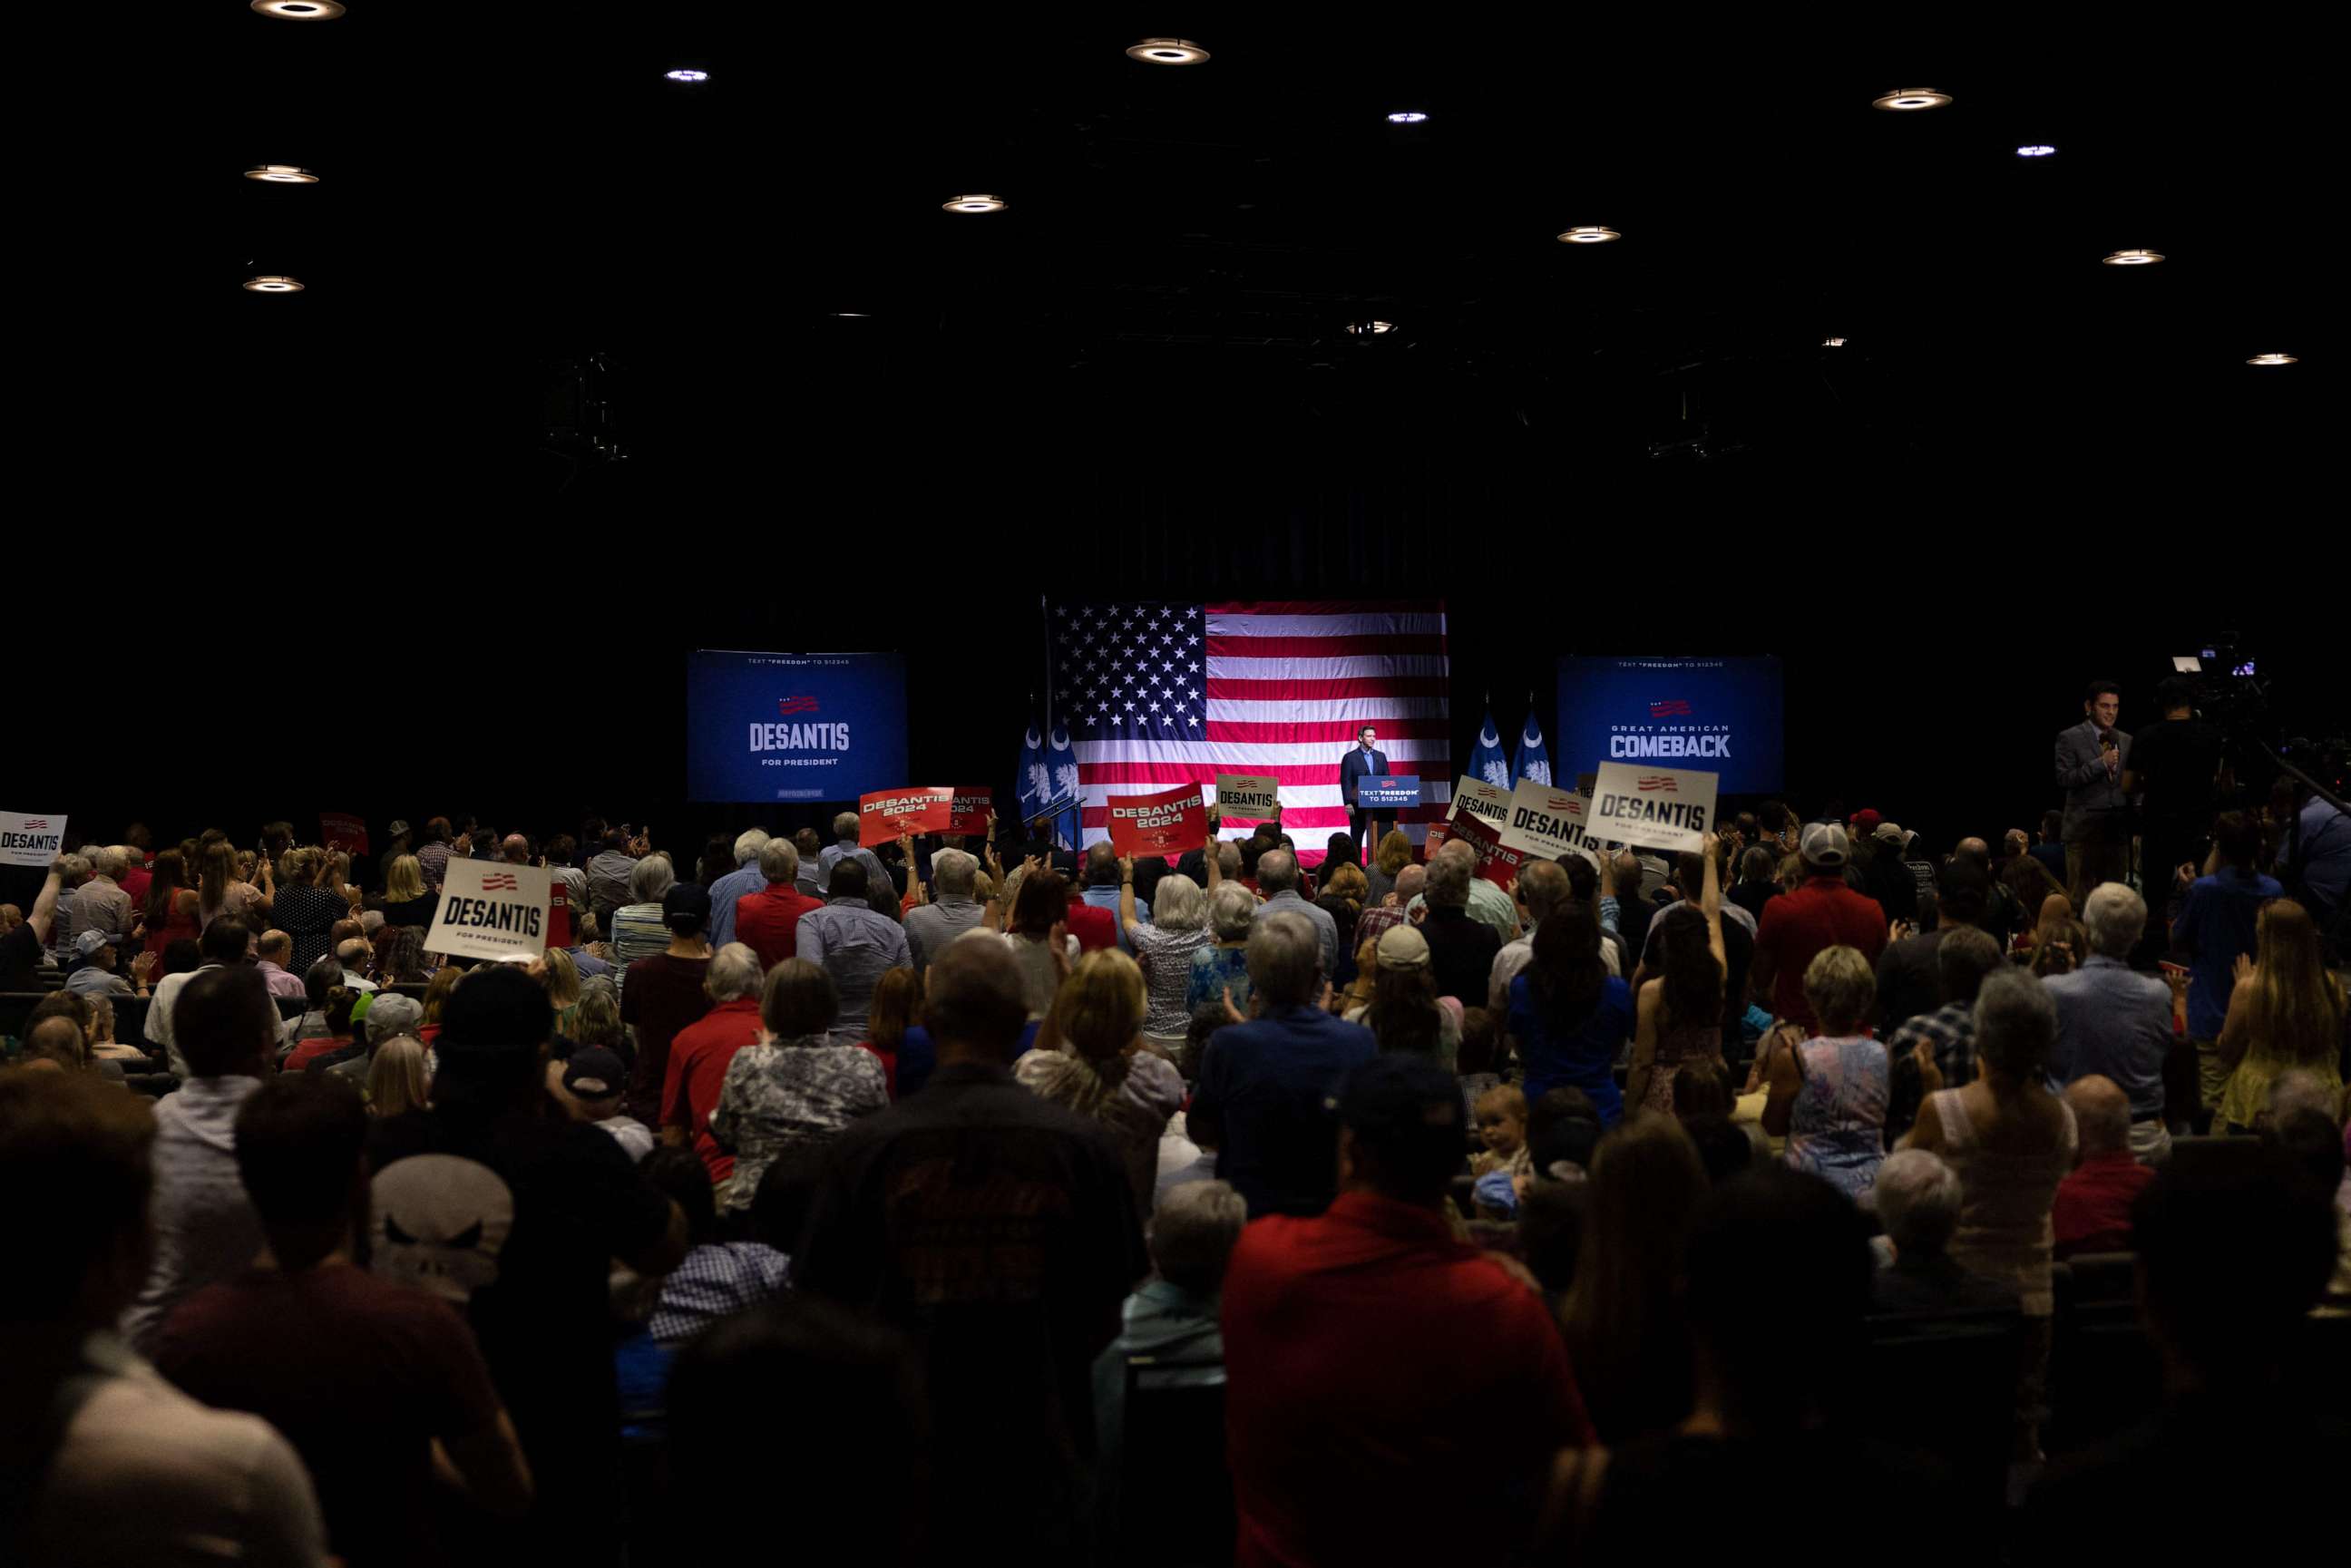 PHOTO: Florida Governor and 2024 presidential hopeful Ron DeSantis speaks during a campaign stop at the Greenville Convention Center in Greenville, South Carolina, on June 2, 2023. (Photo by LOGAN CYRUS/AFP via Getty Images)